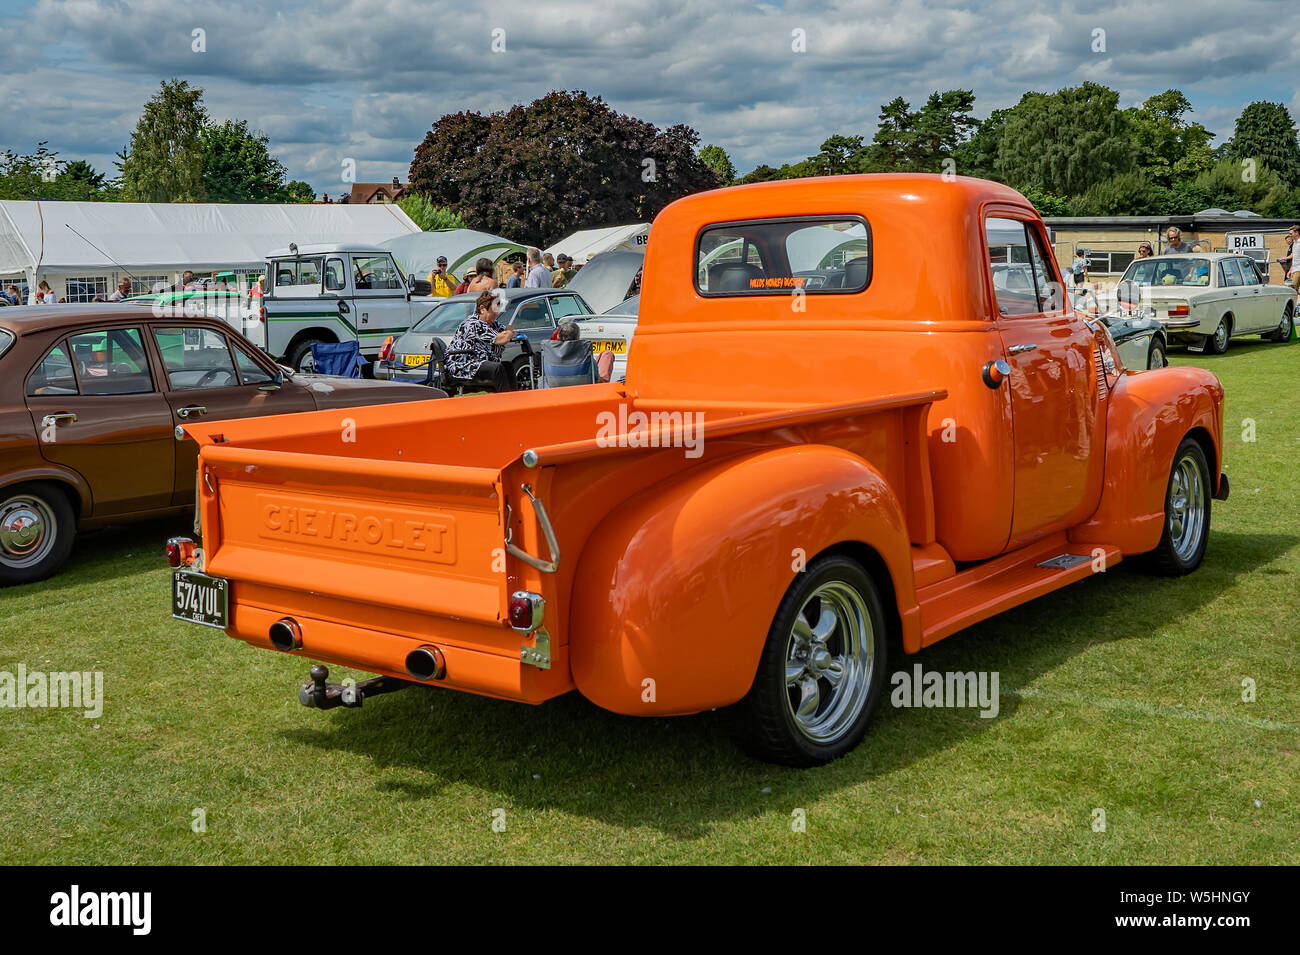 Rear view of a classic Chevrolet pickup truck, in bright orange, on display at the annual classic and vintage car show held in Wroxham, Norfolk, UK Stock Photo